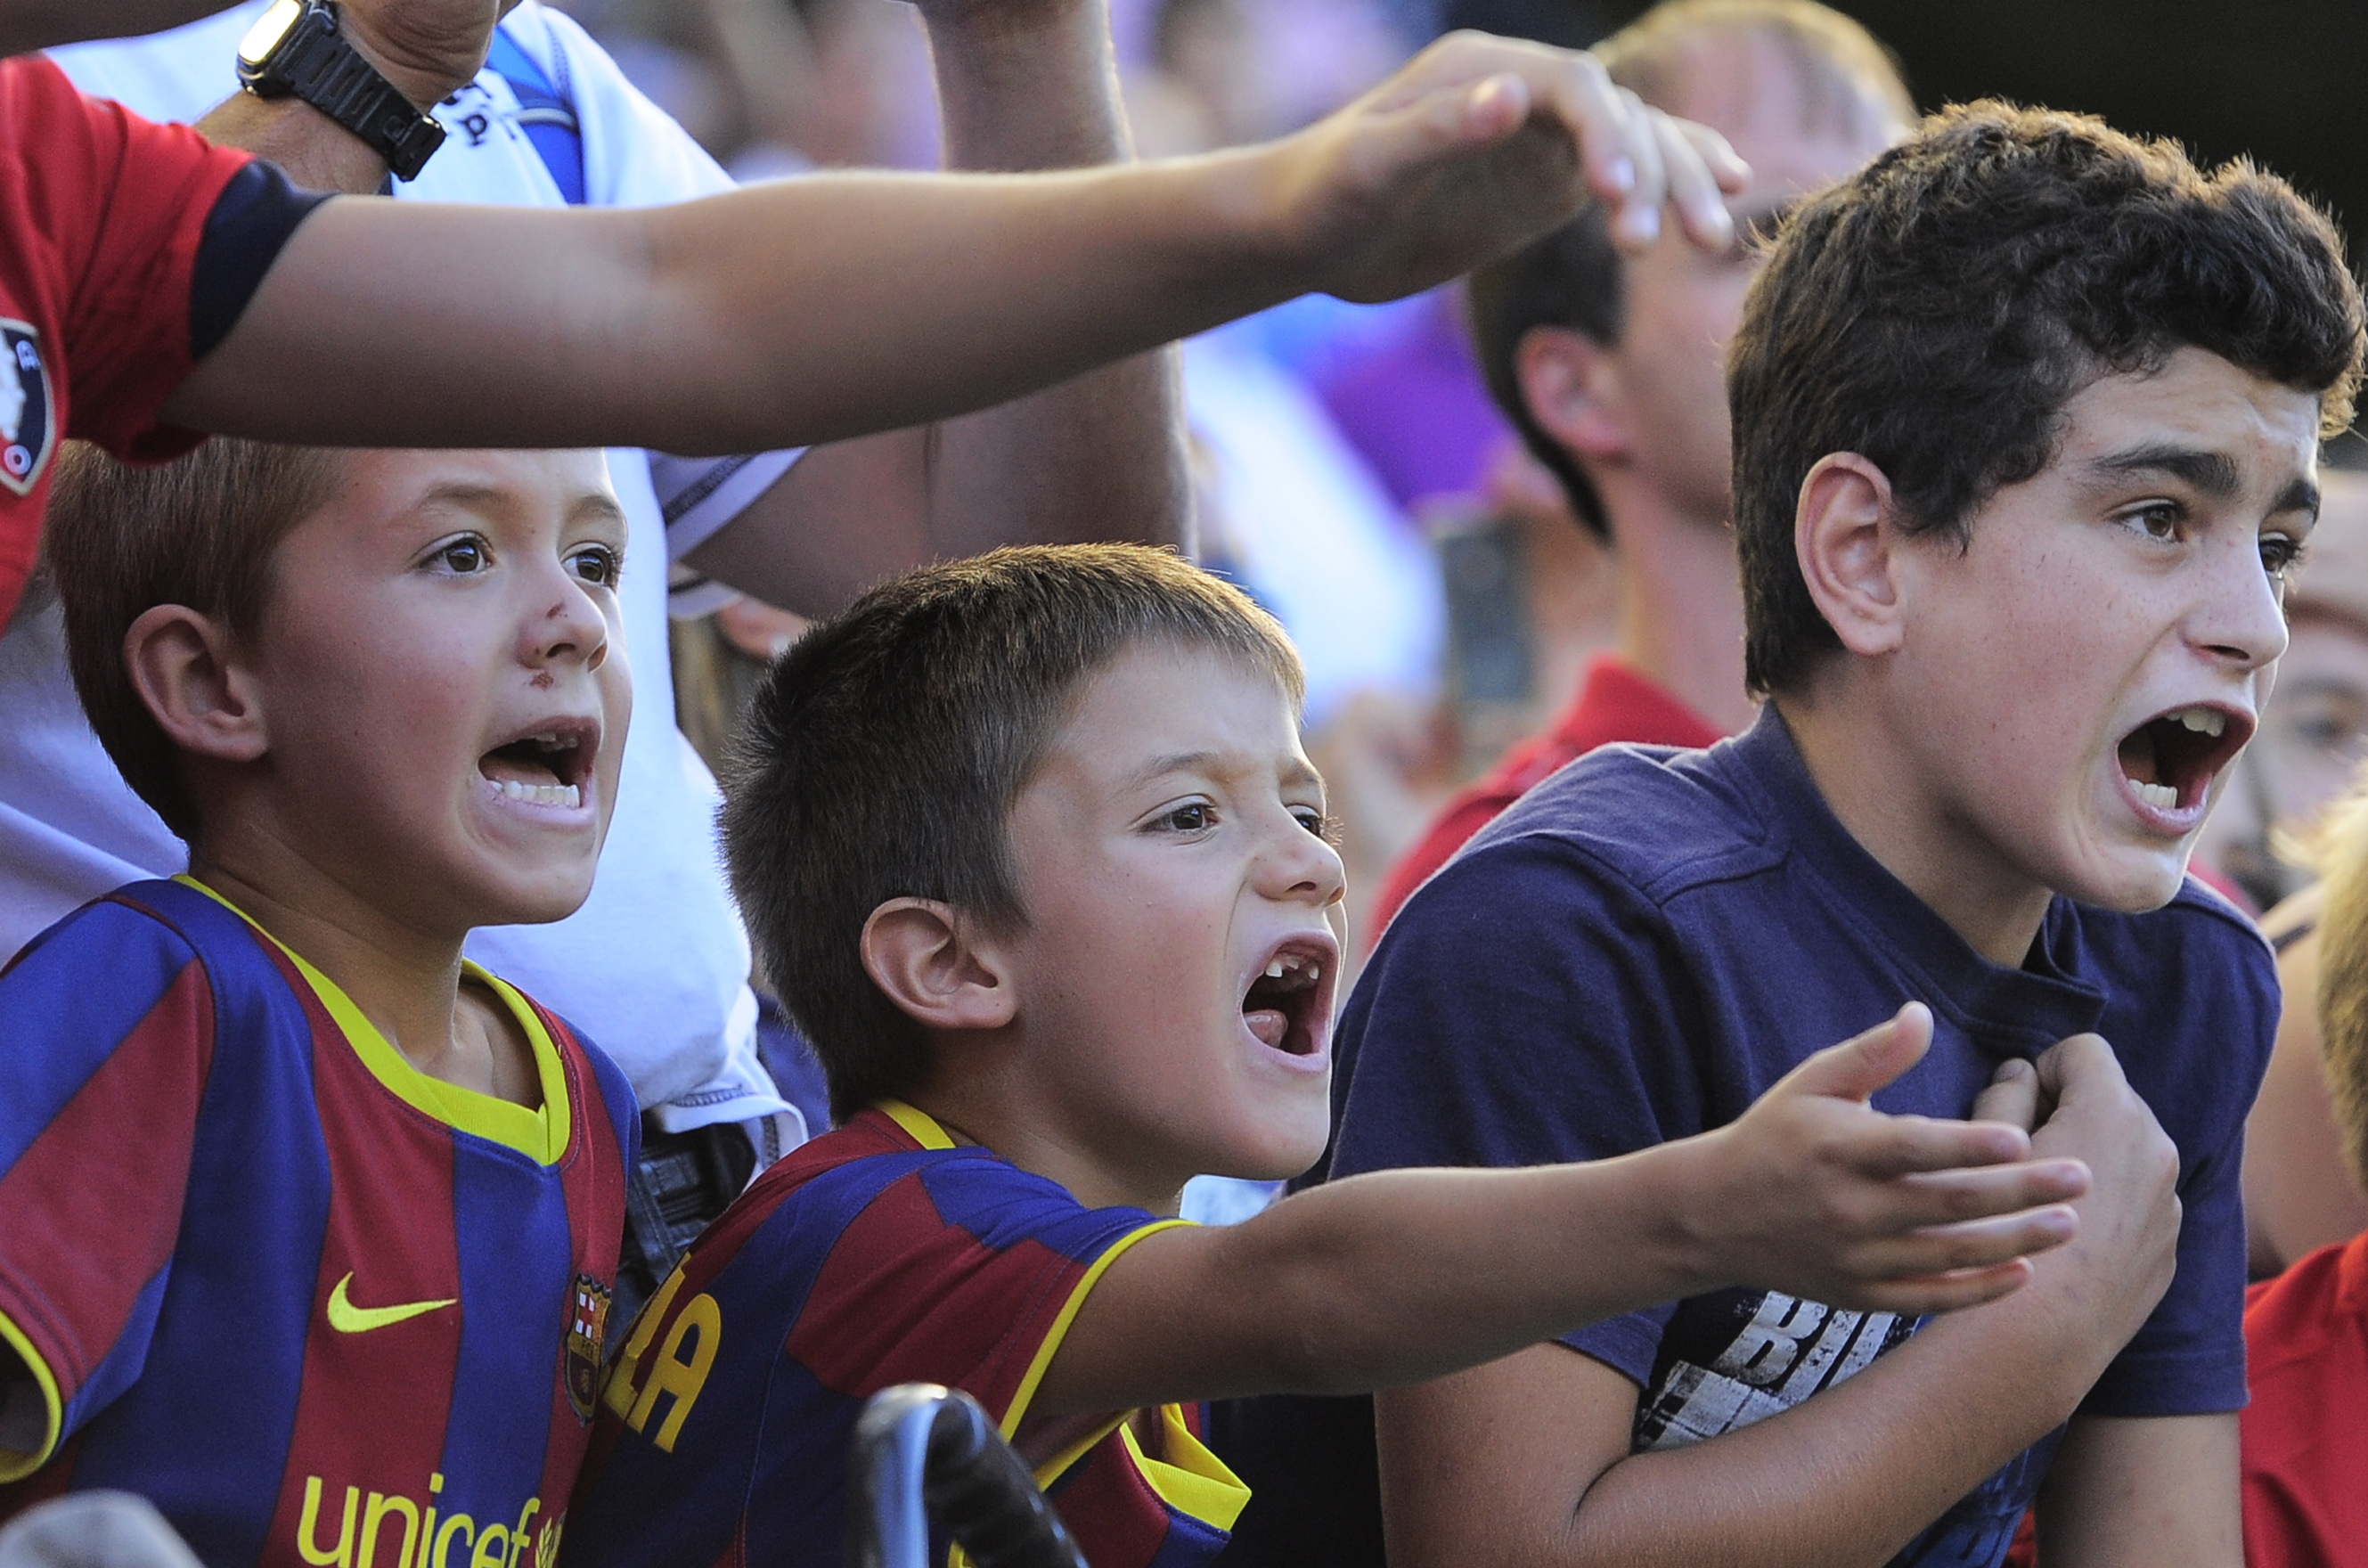 handicap riem fout Soccer club Barcelona makes mom buy $60 game ticket for her baby - CBS News